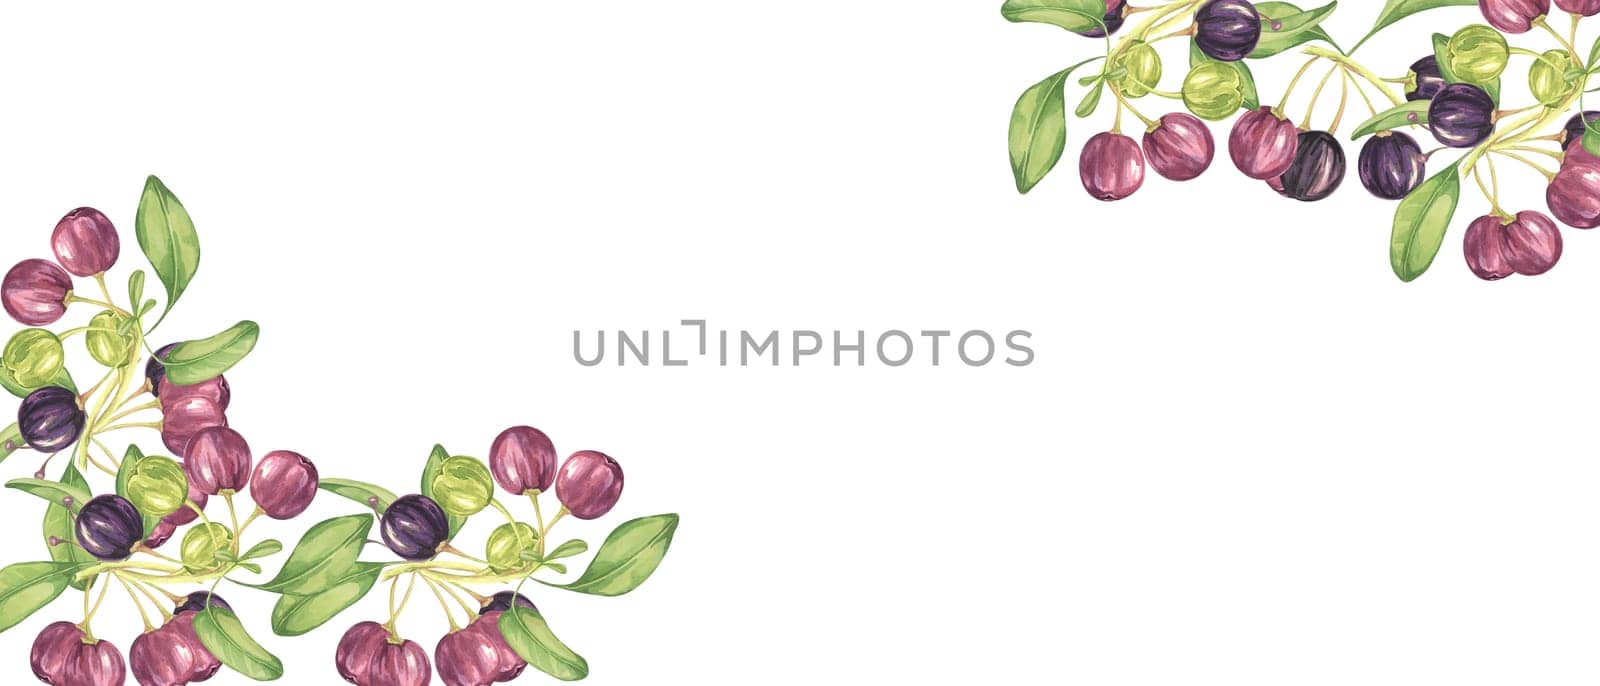 Maqui berriy and leaves in purple and green banner. Watercolor illustration of Chilean wineberry cherry plant for printing,packaging, web design by Fofito